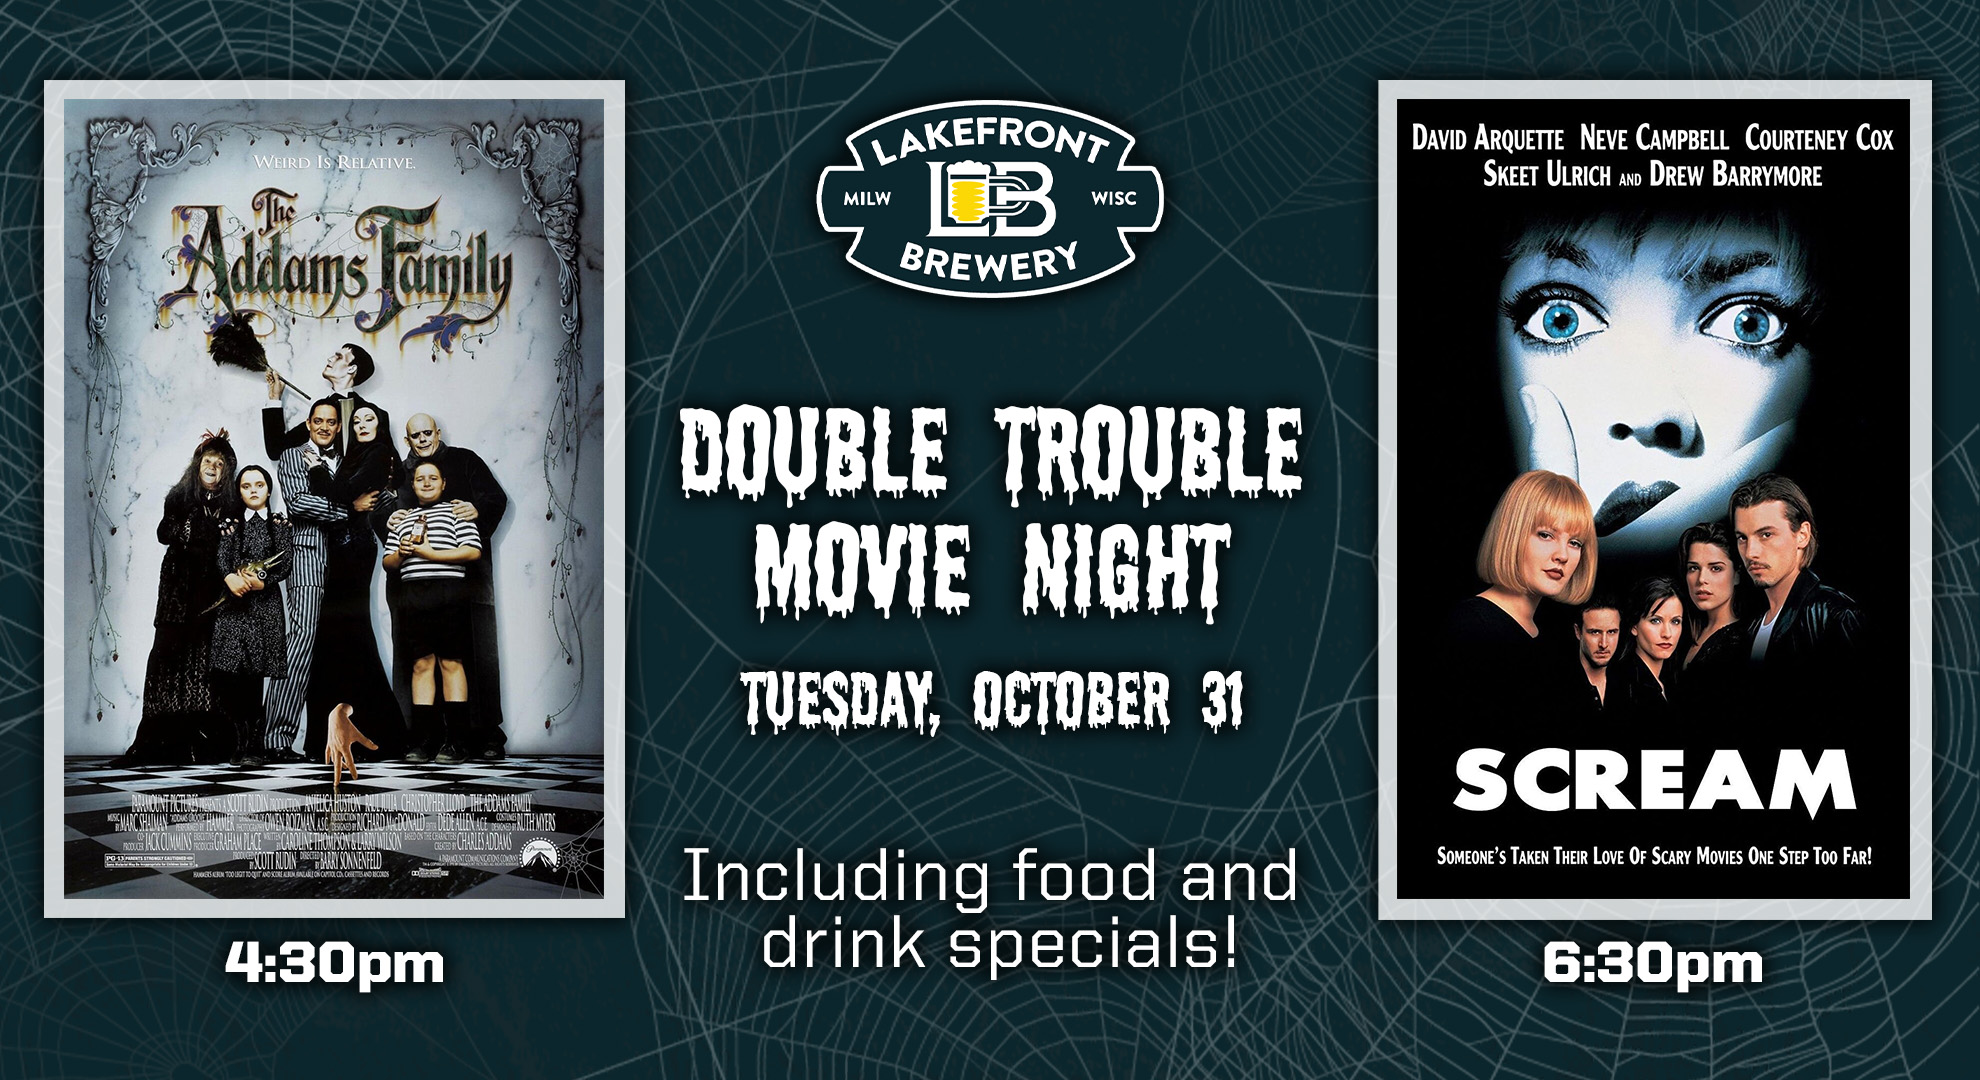 Lakefront Brewery Celebrates Halloween with a Double Feature